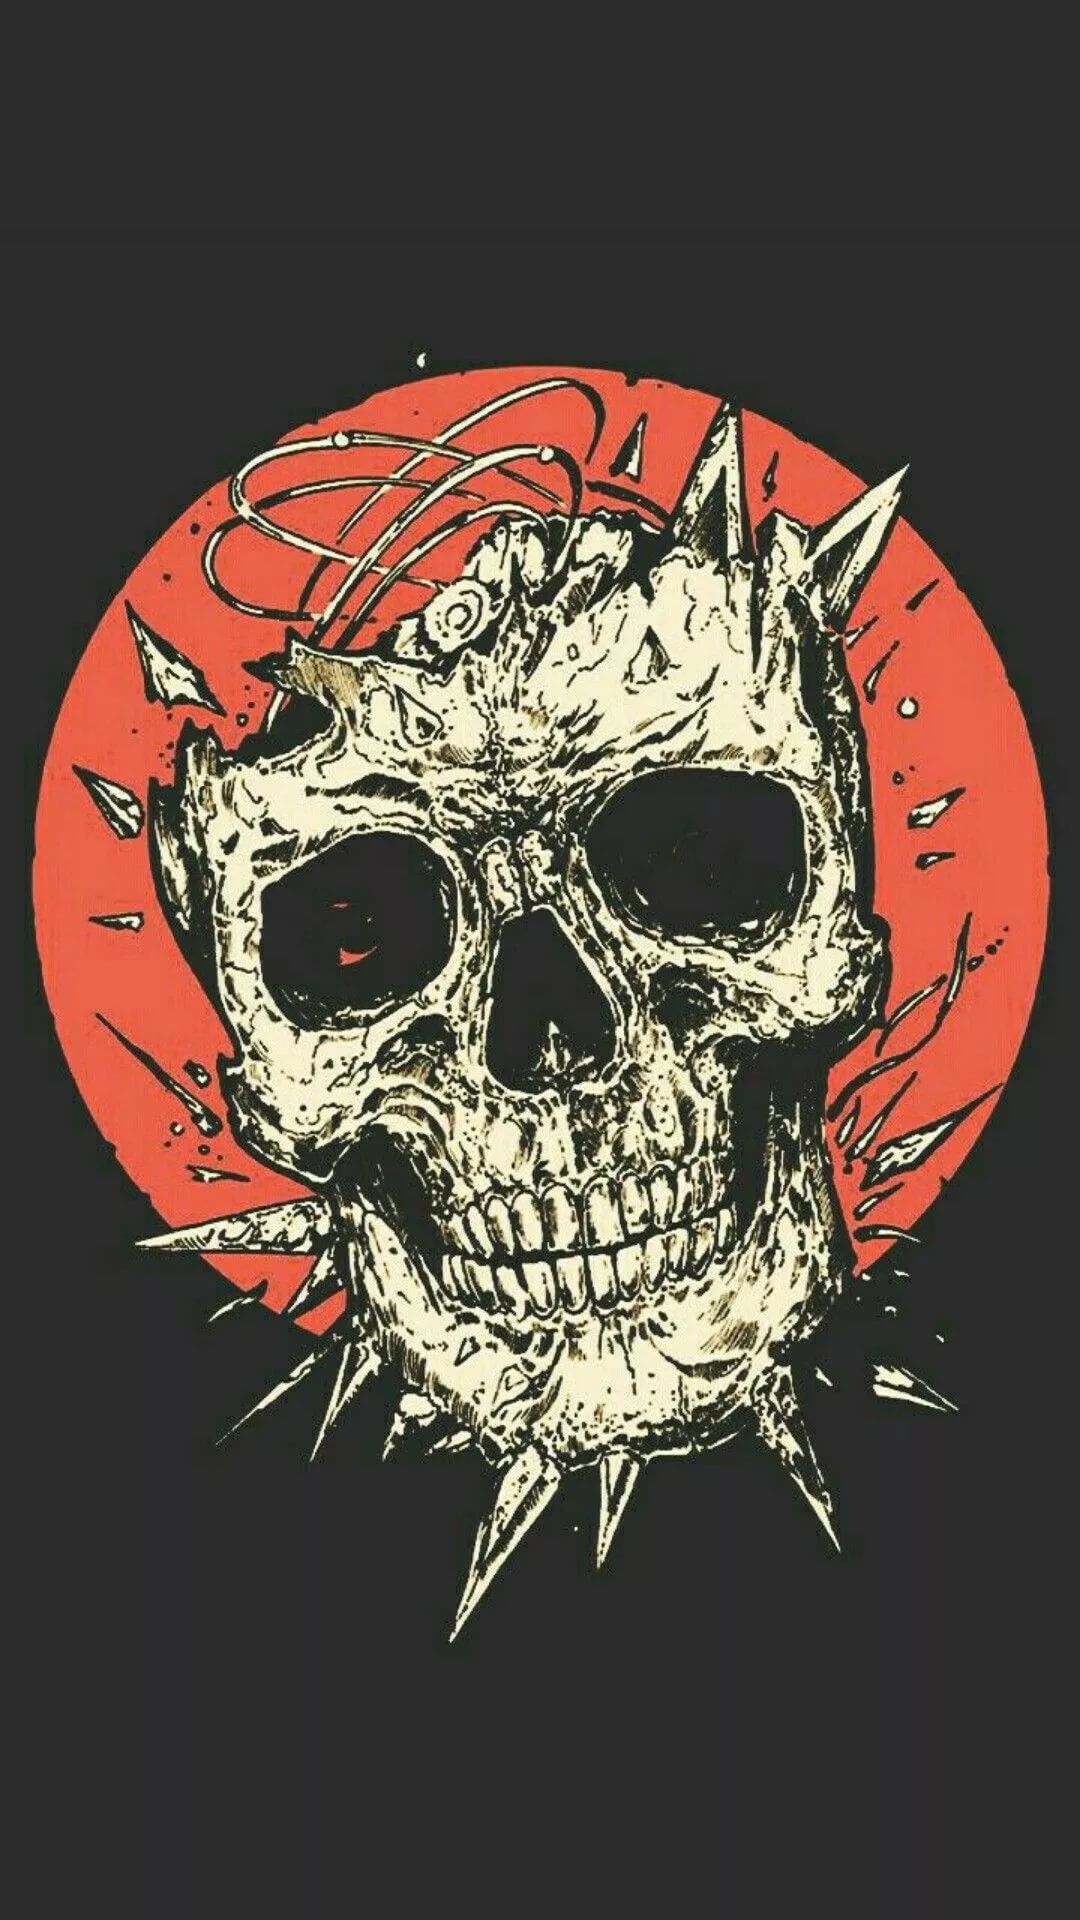 Skeleton iPhone wallpaper high quality